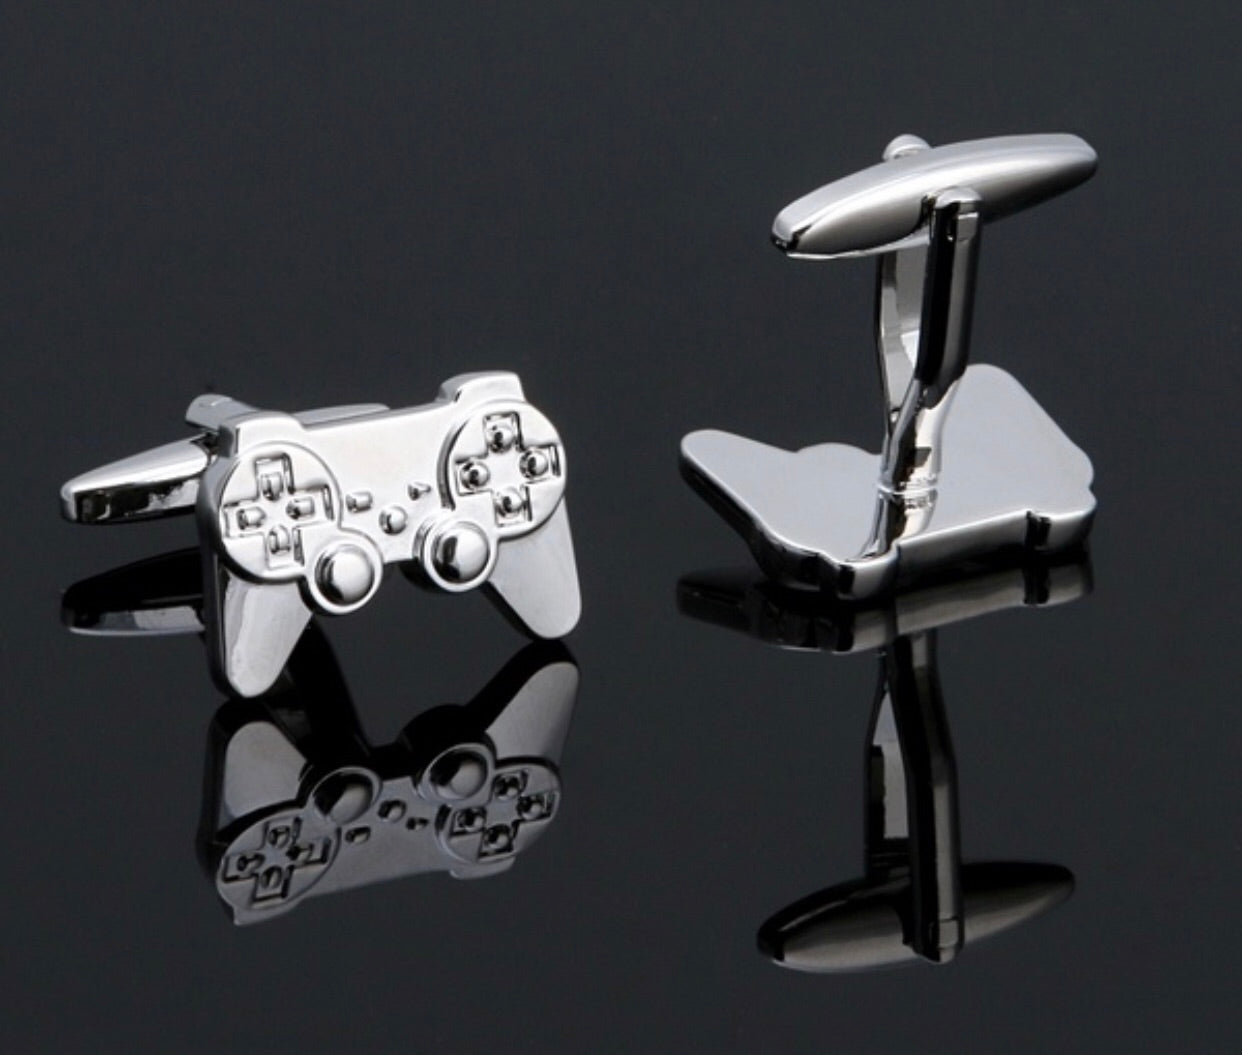 Stainless Steel Game Console Cuff Links